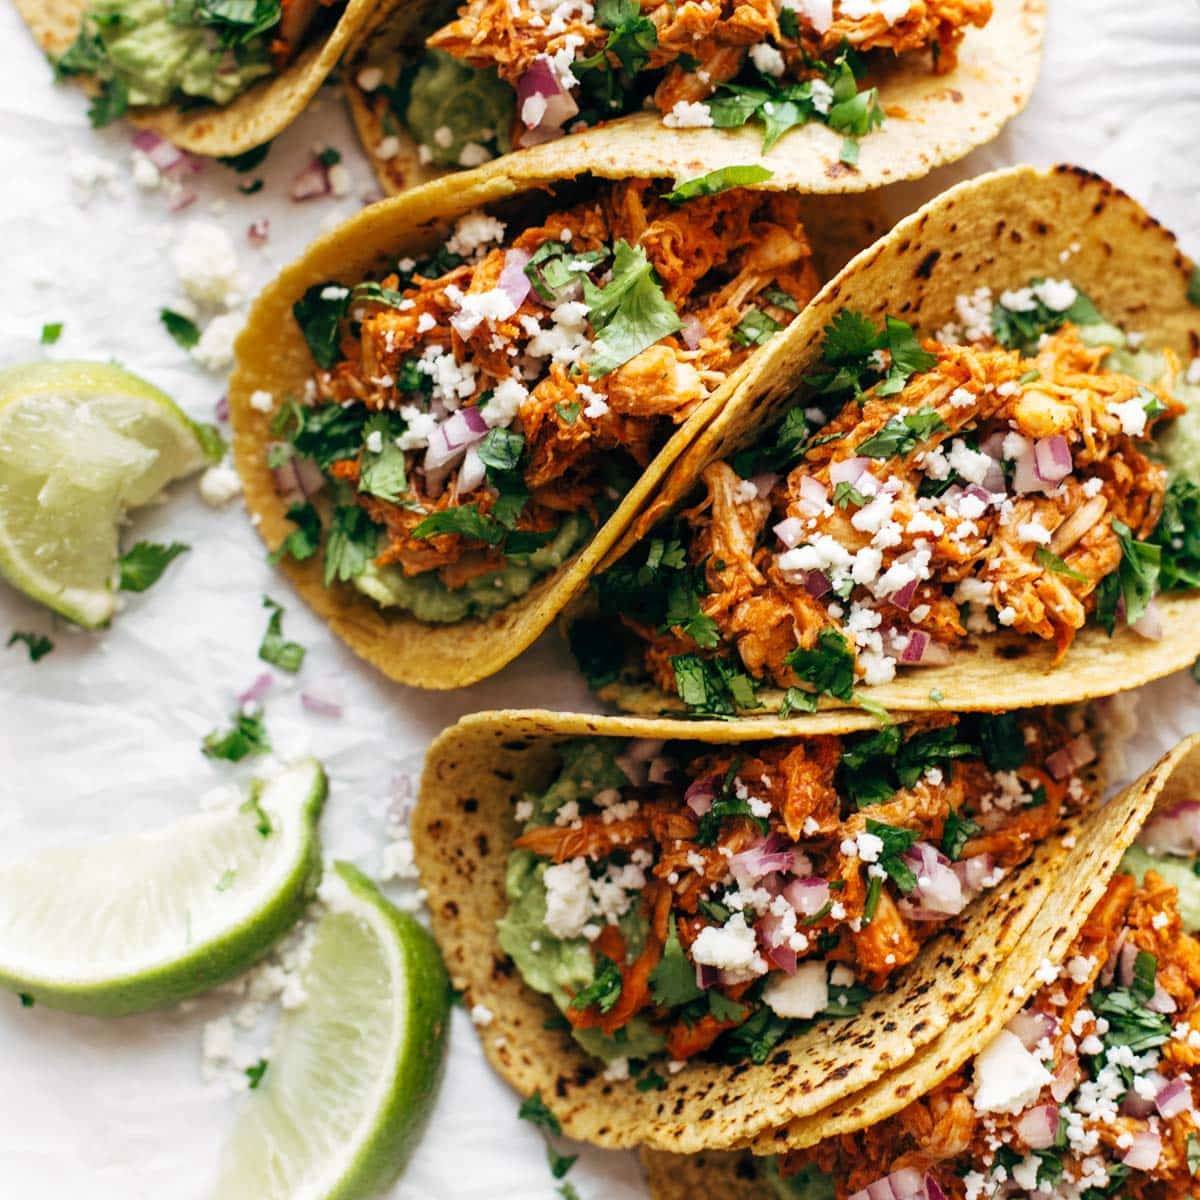 Spicy, saucy Chicken Tinga Tacos with fire-roasted tomatoes, smoky chipotle, garlic, chopped onions, corn tortillas and a lime wedge for squeezing.